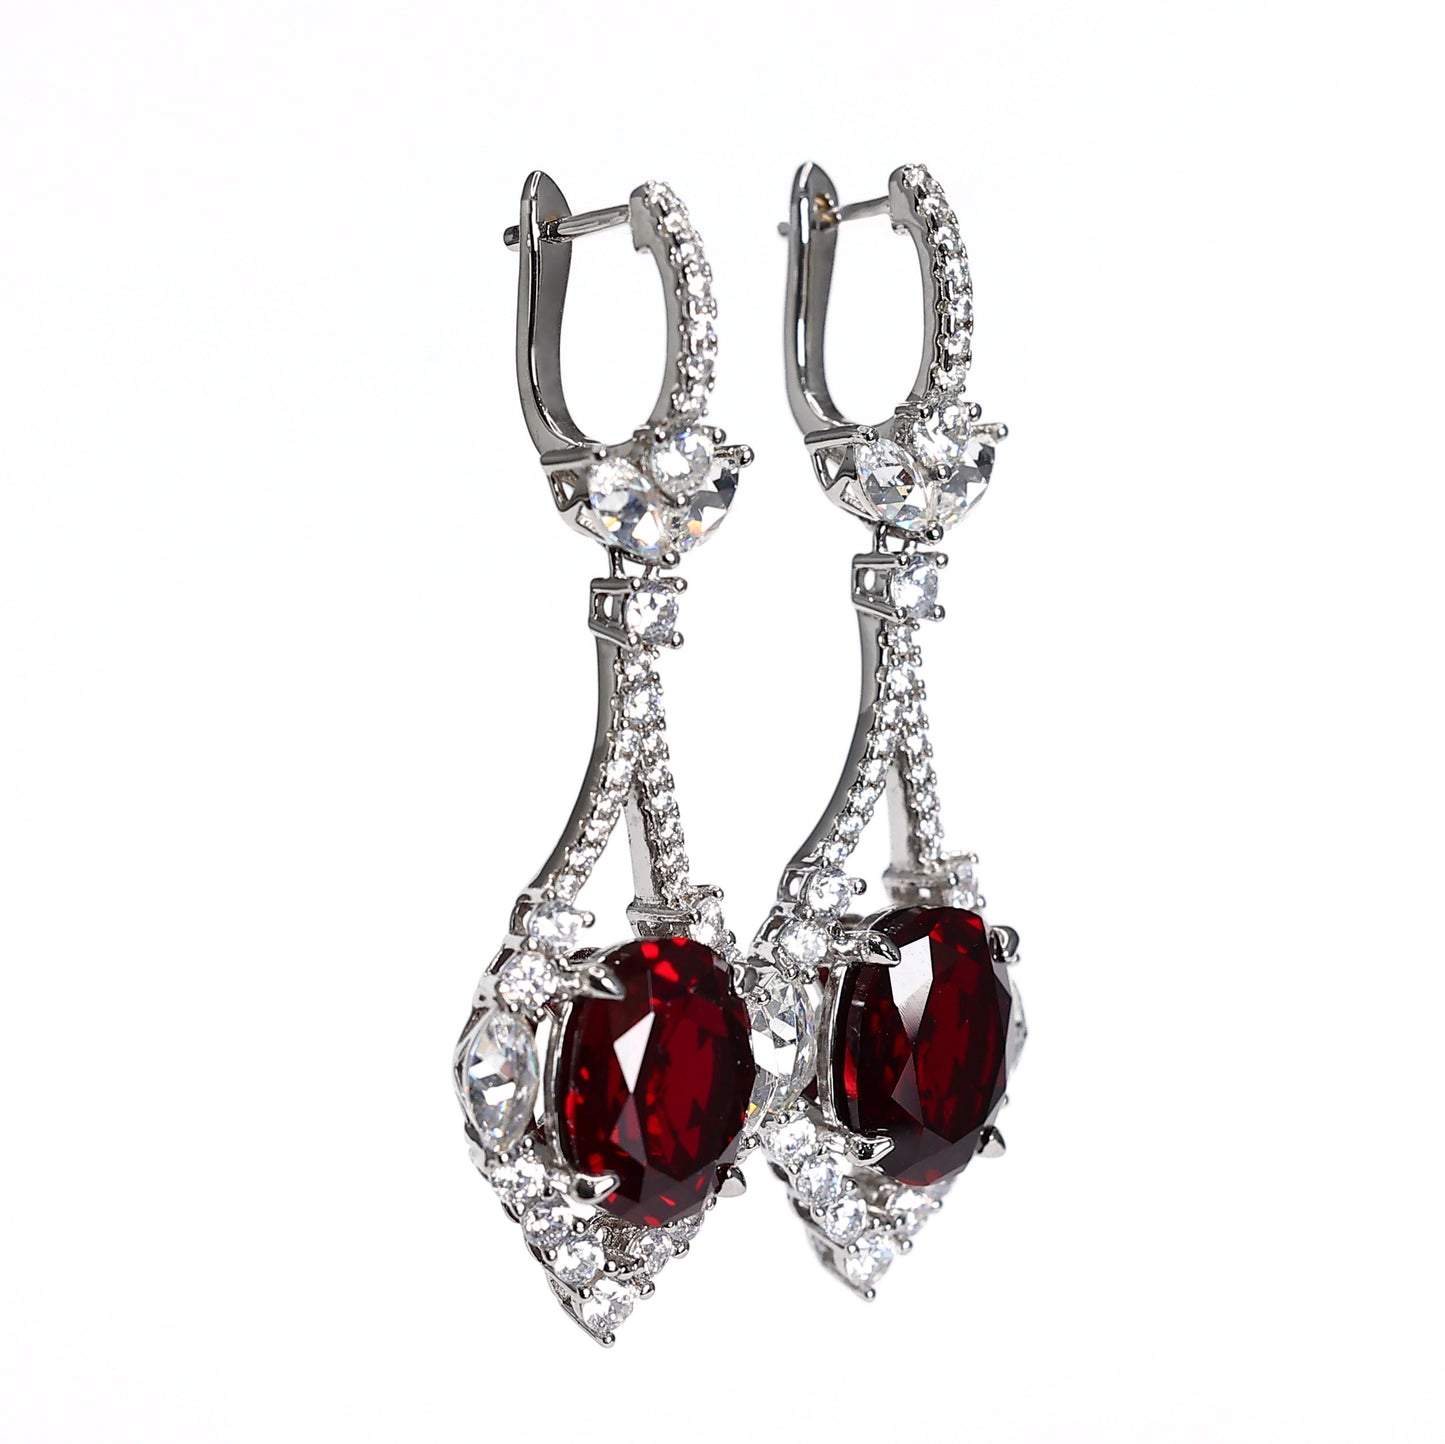 Micro-setting Ruby color lab created stones fancy earrings, sterling silver.